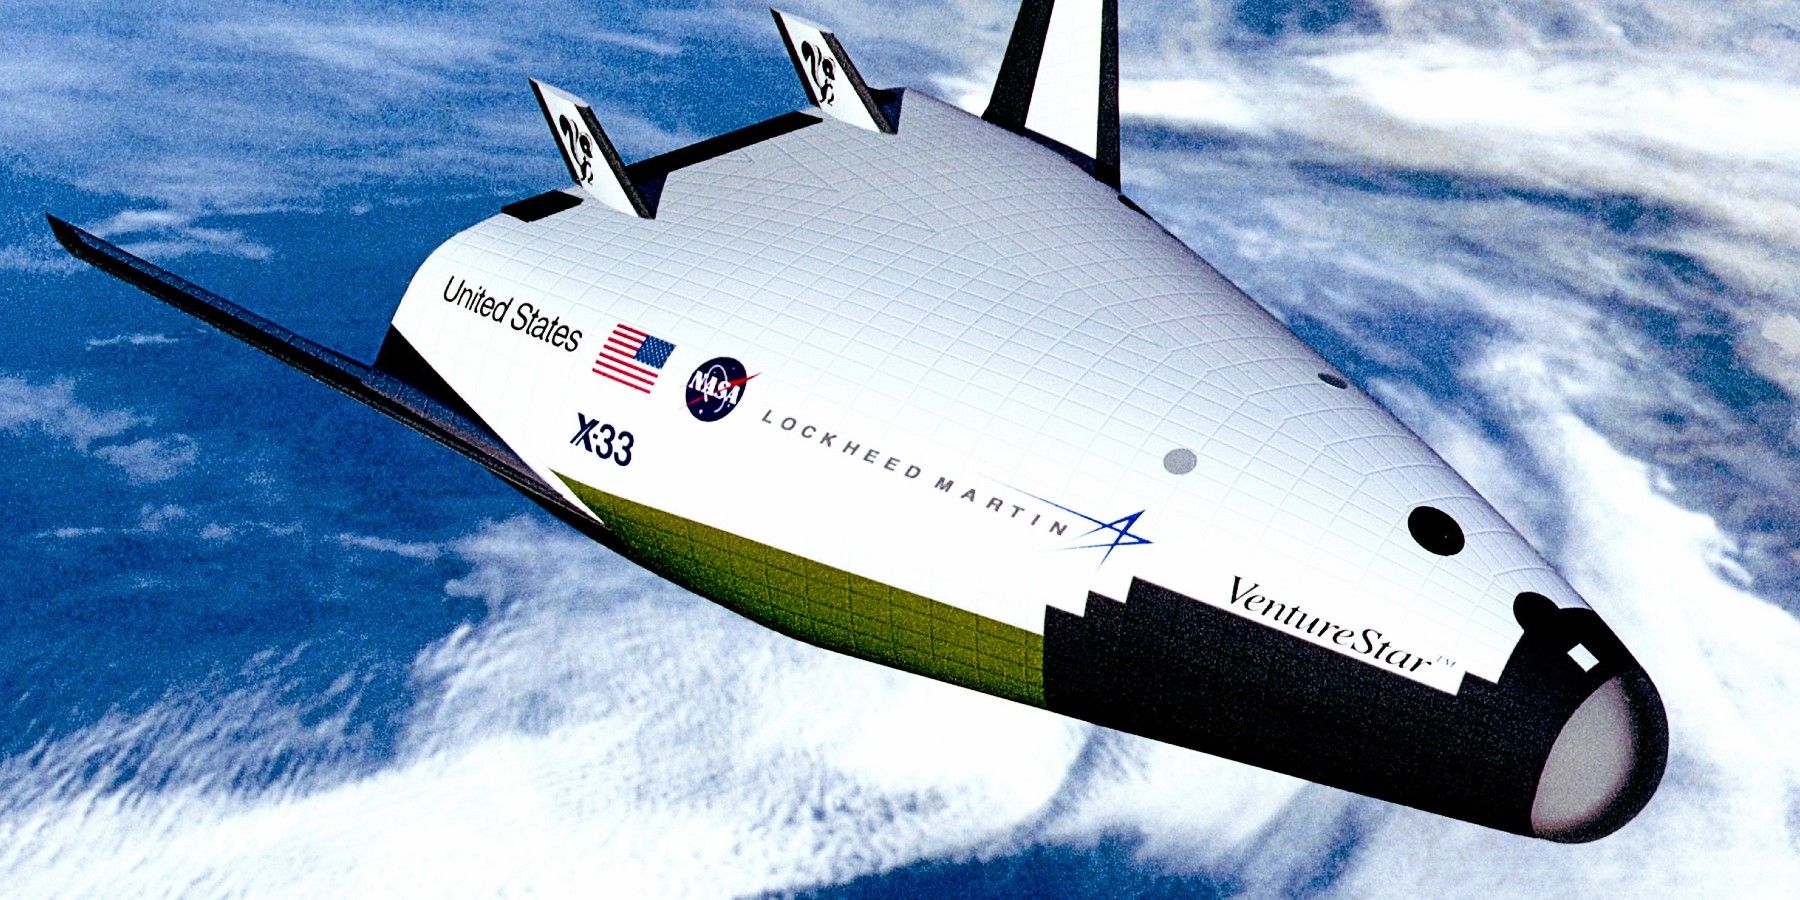 The NASA X-33 1990s Space Plane Project